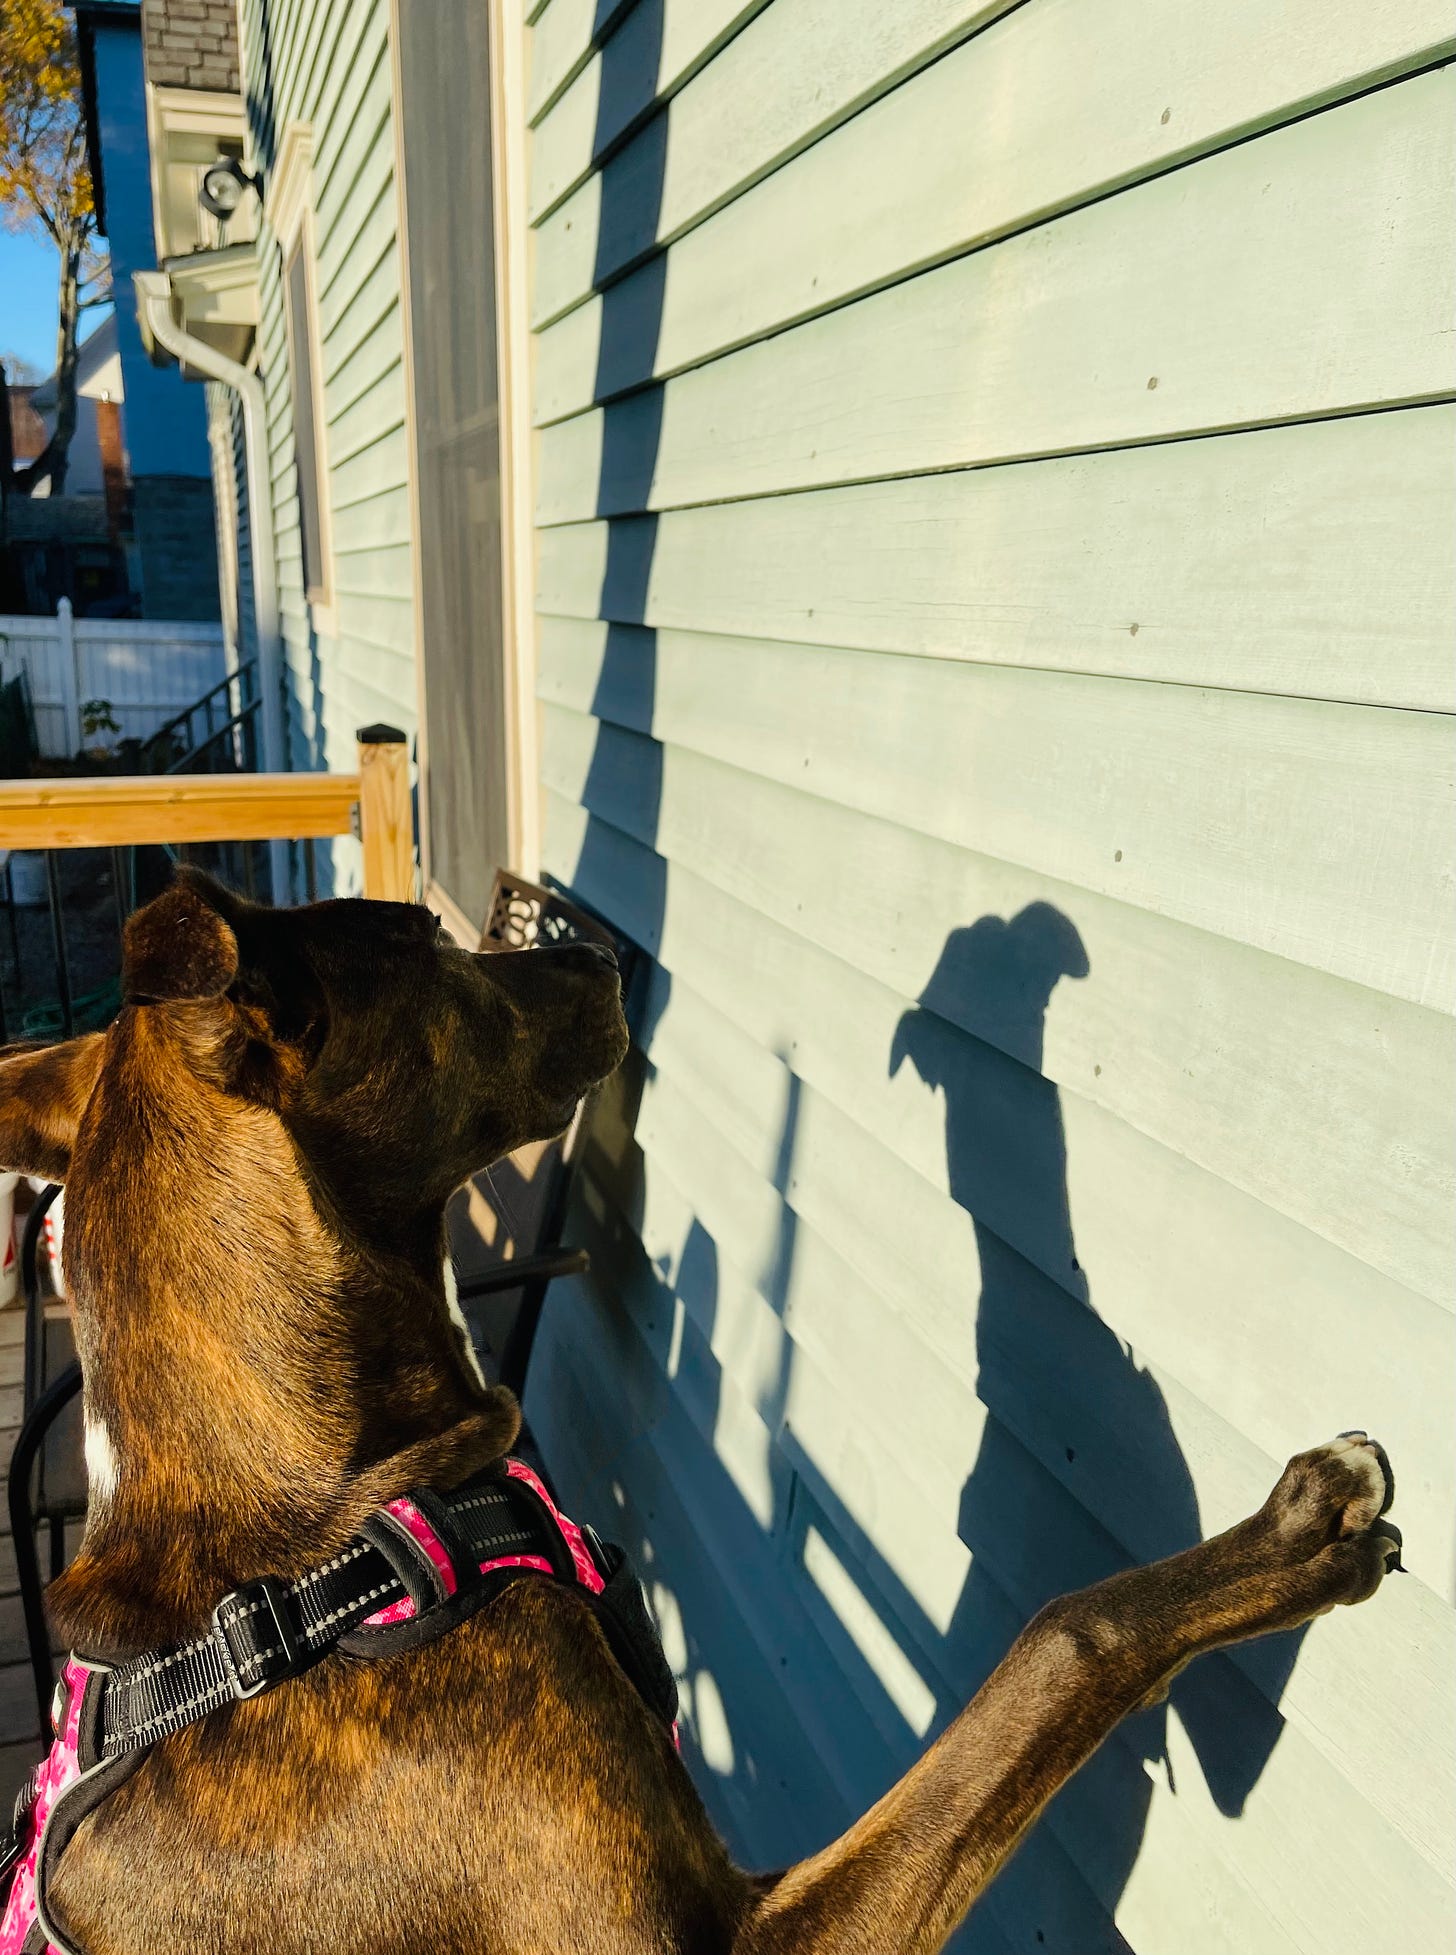 puppy on hind legs looking at her shadow on the side of a house